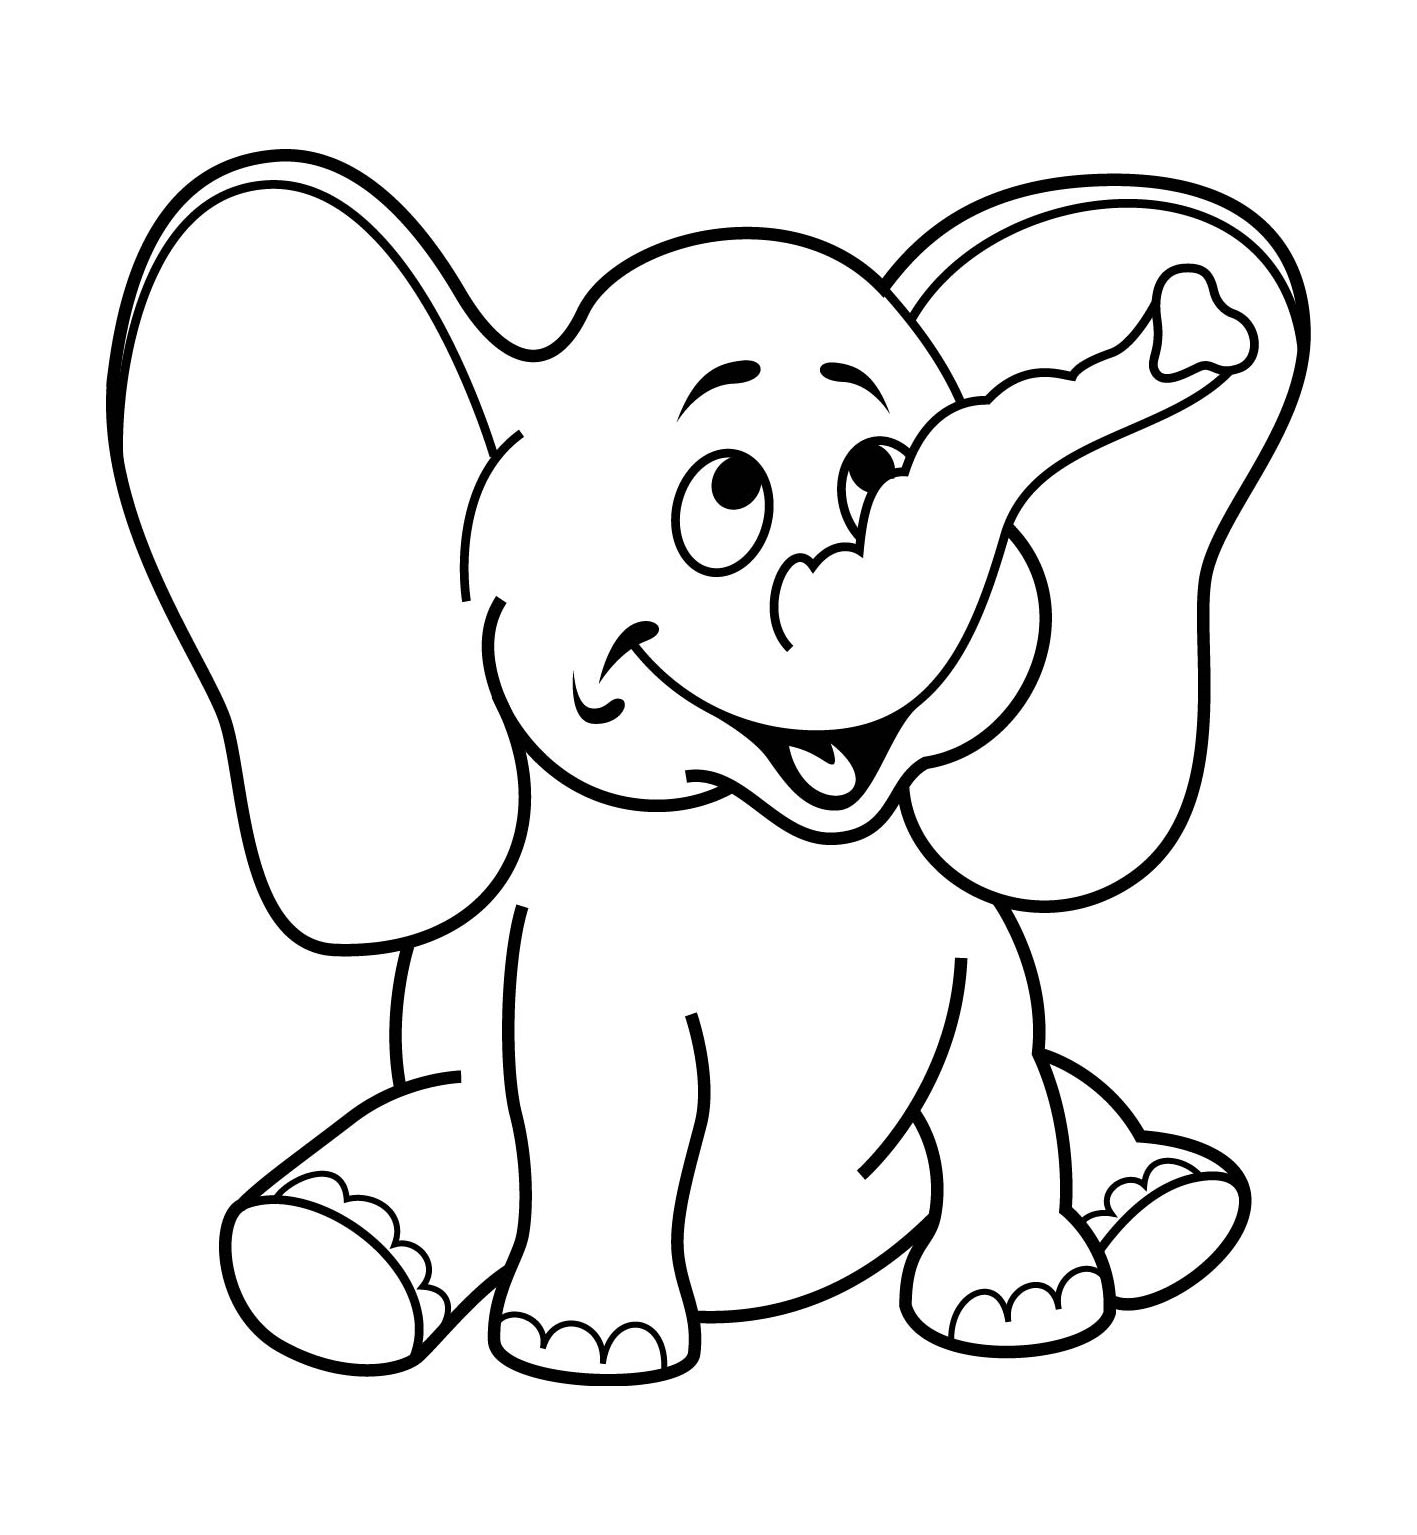 coloring-pages-for-3-4-year-old-girls-3-4-years-nursery-to-print-for-free